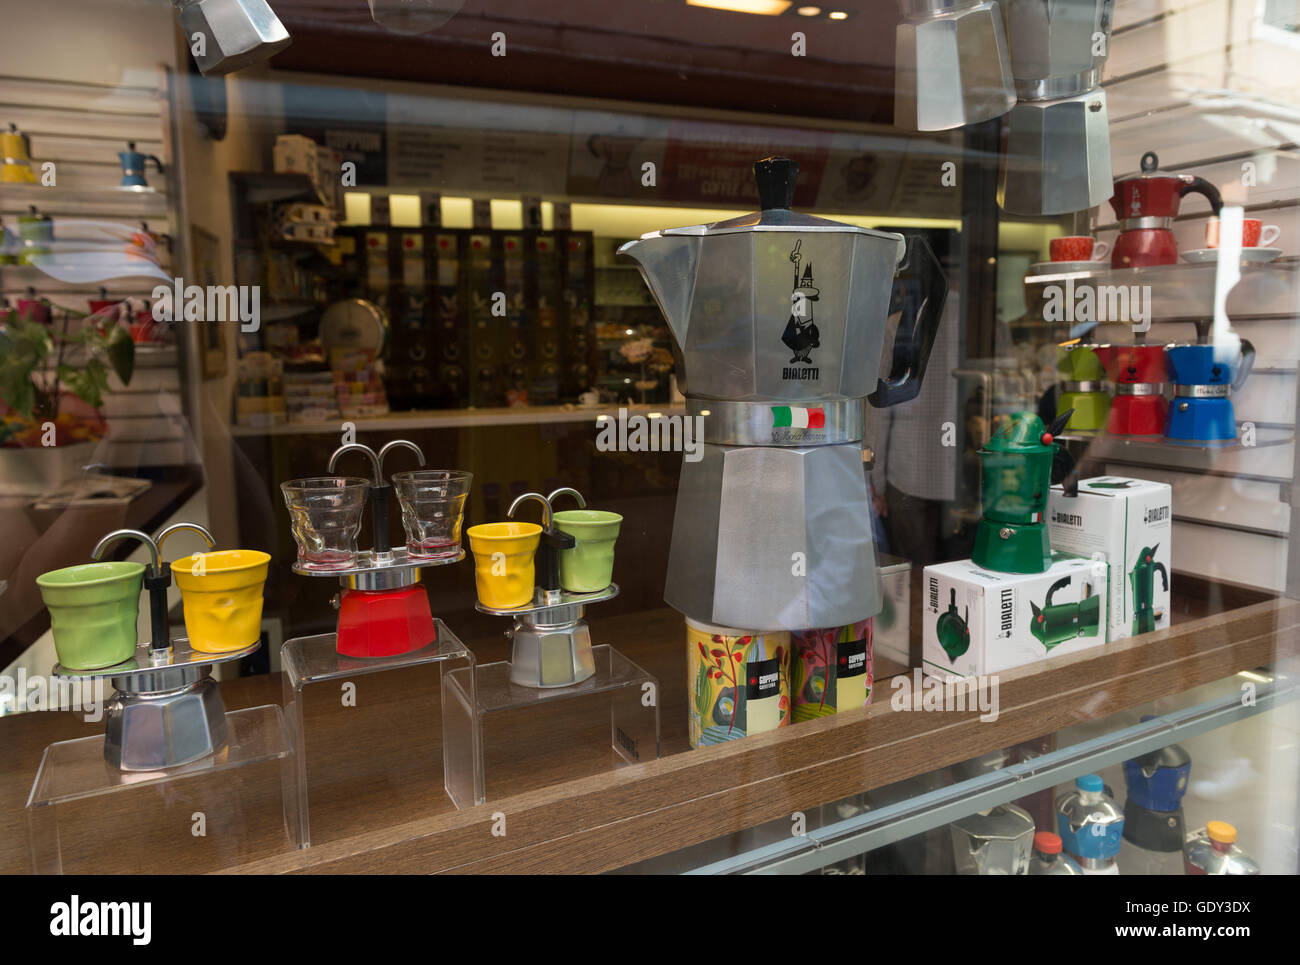 A kitchen store window with moka coffee pots in Venice, Italy Stock Photo